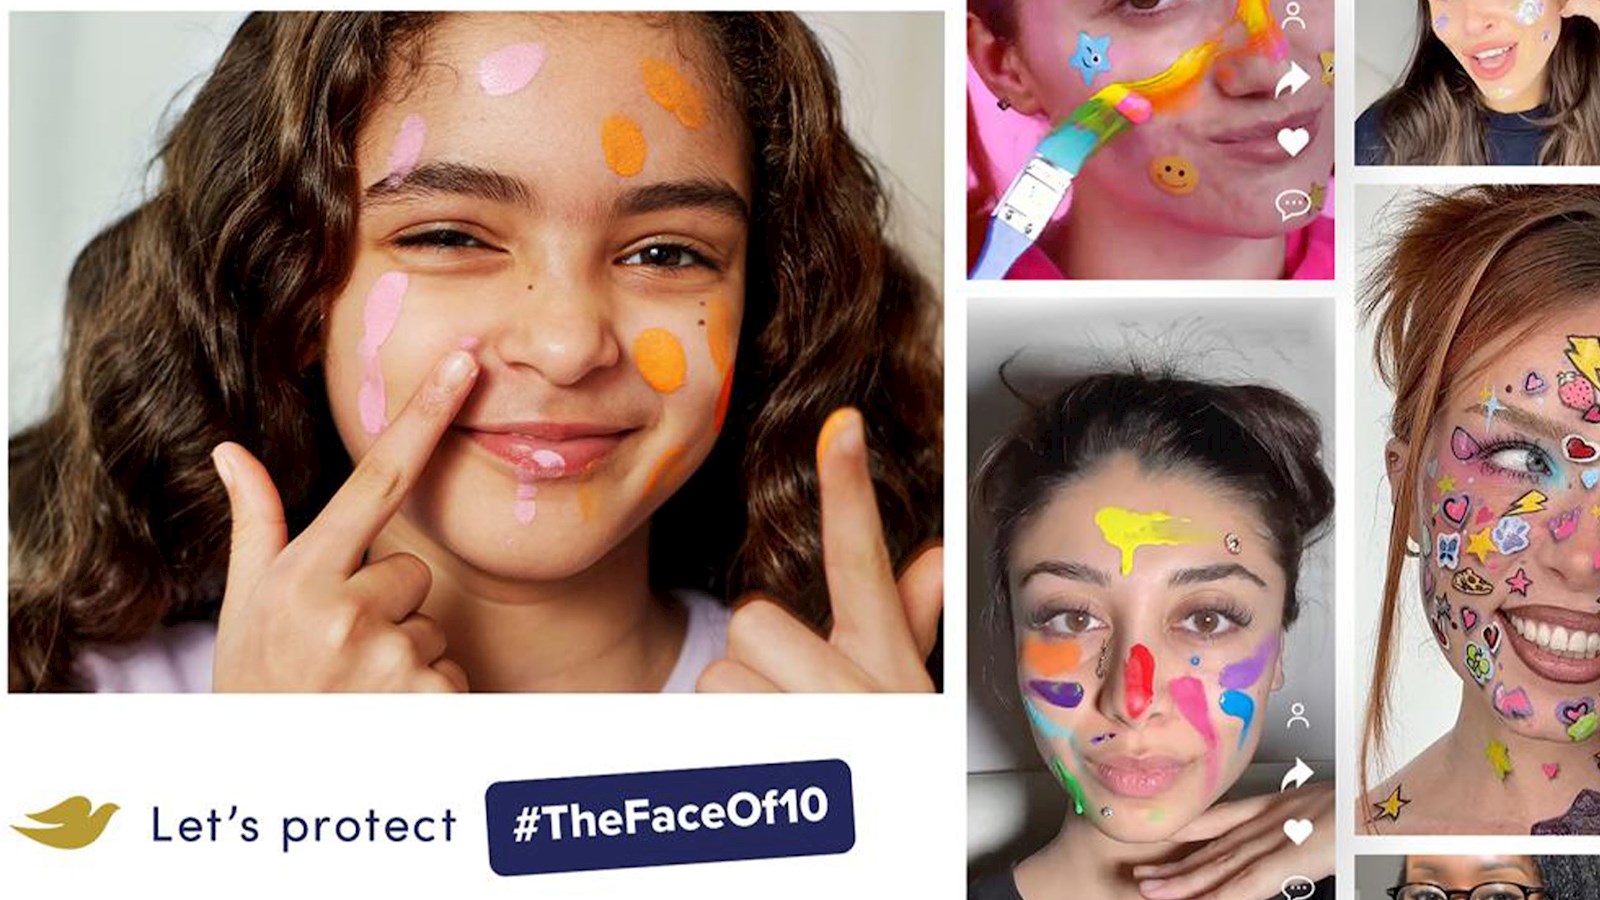 Collage of girls and women with face paint on and the Dove logo with the text "Let's protect #thefaceof10"